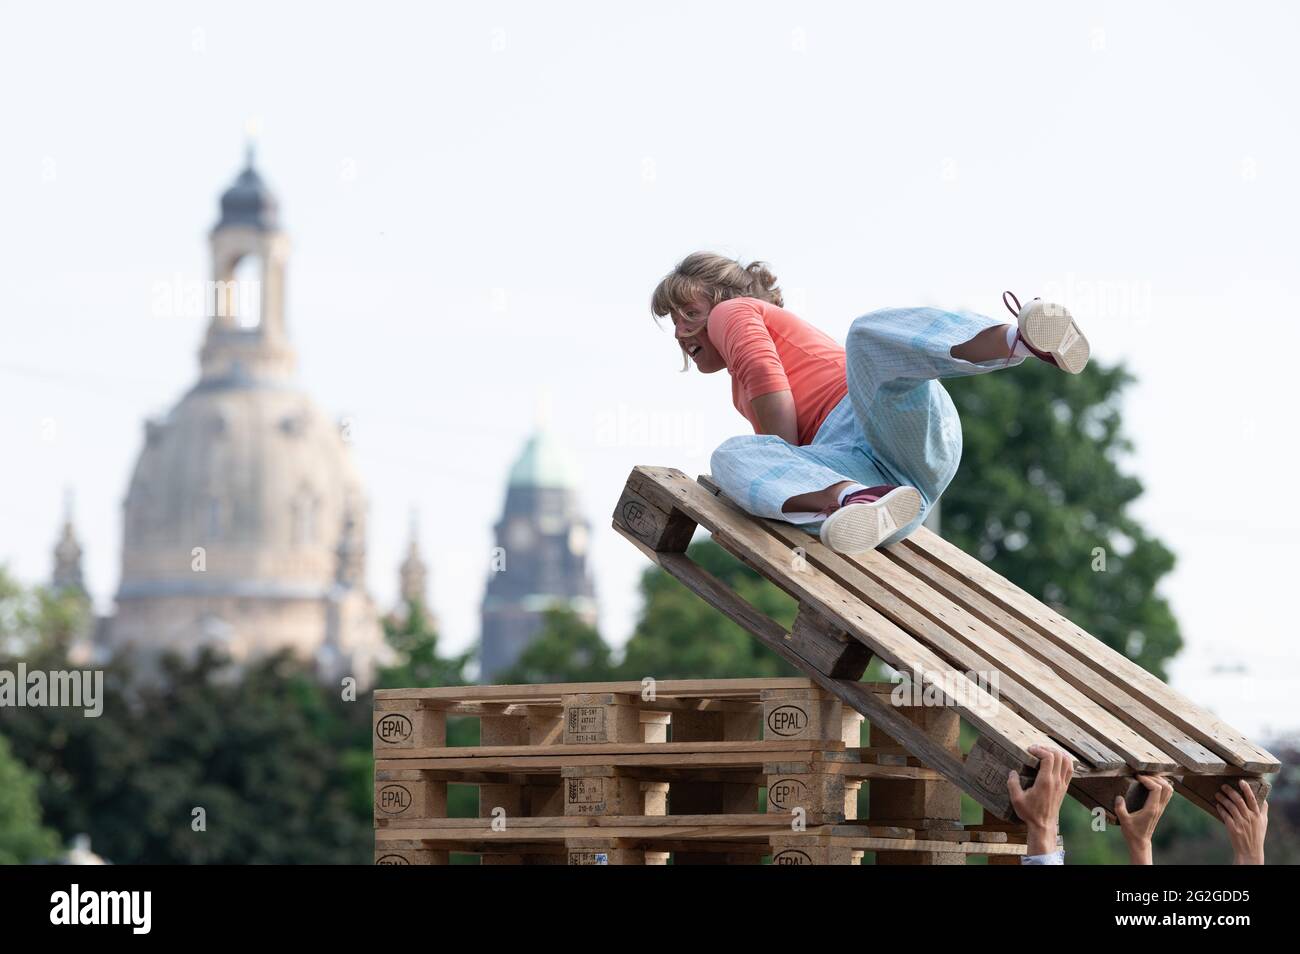 Dresden, Germany. 11th June, 2021. An artist of the small circus group  "FahrAway" from Switzerland lies on a stack of Euro pallets during a  performance in front of the backdrop of the